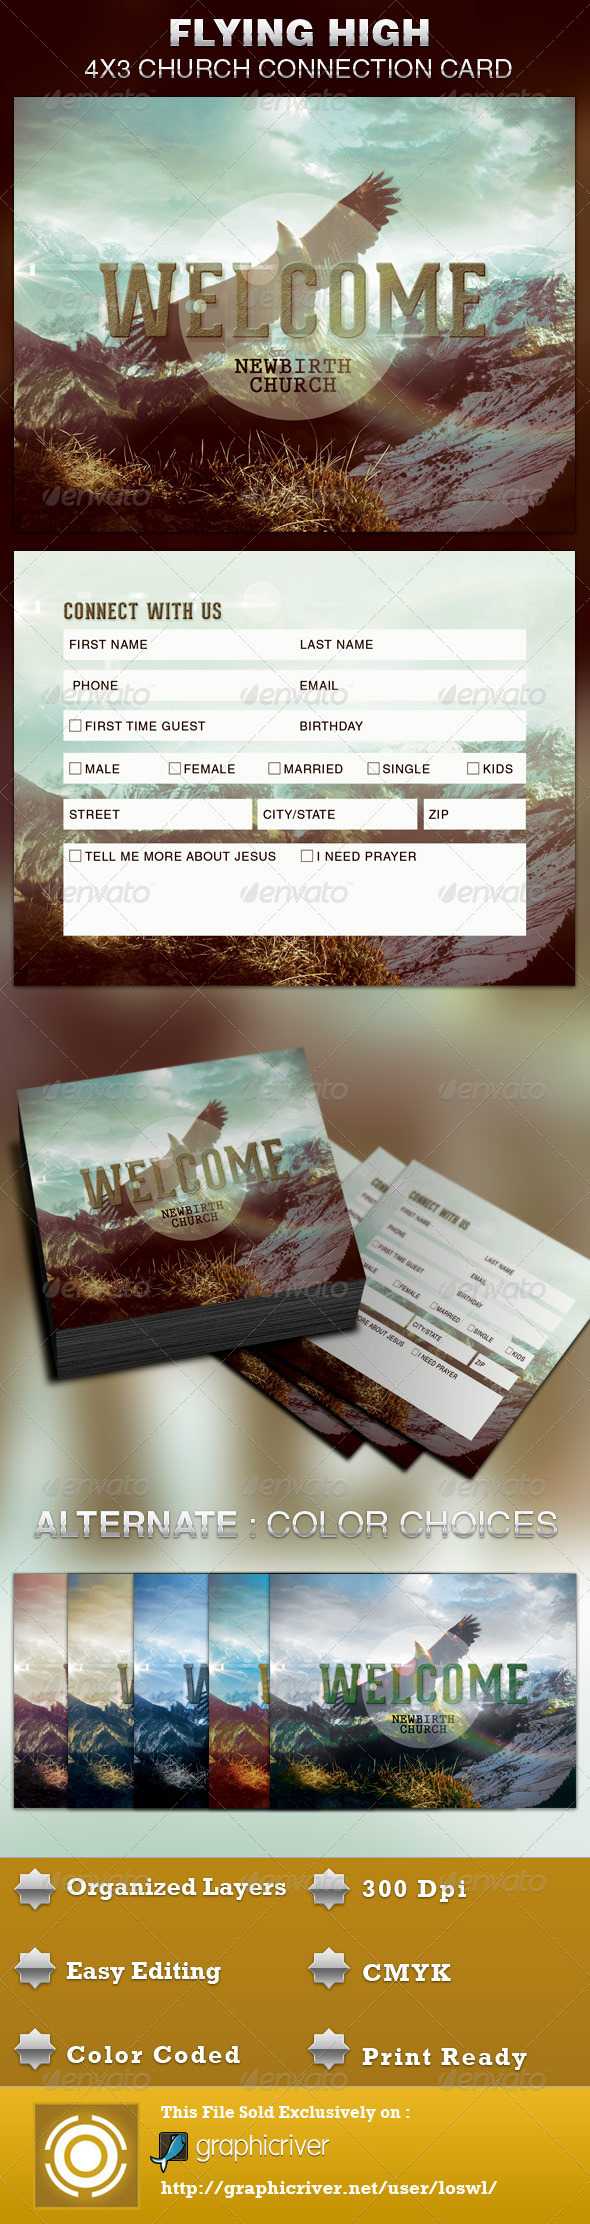 Summit Card Designs & Invite Templates From Graphicriver With Decision Card Template